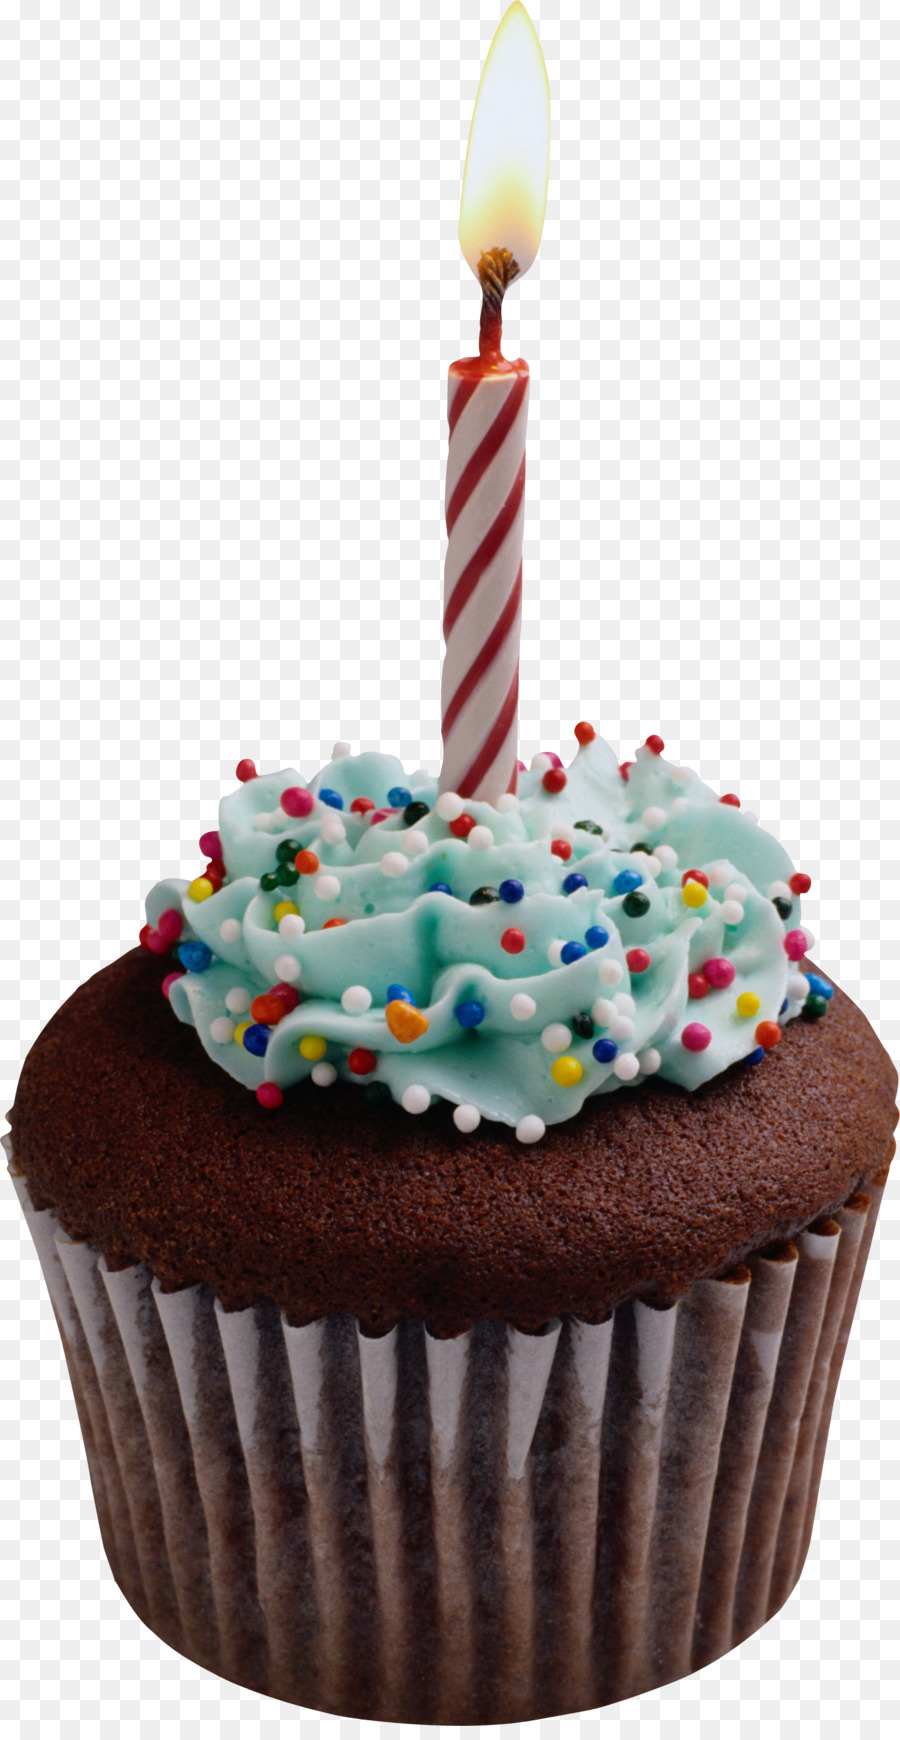 Birthday cake Cupcake Golf course - First birthday png download - 1548*2968 - Free Transparent Birthday Cake png Download.